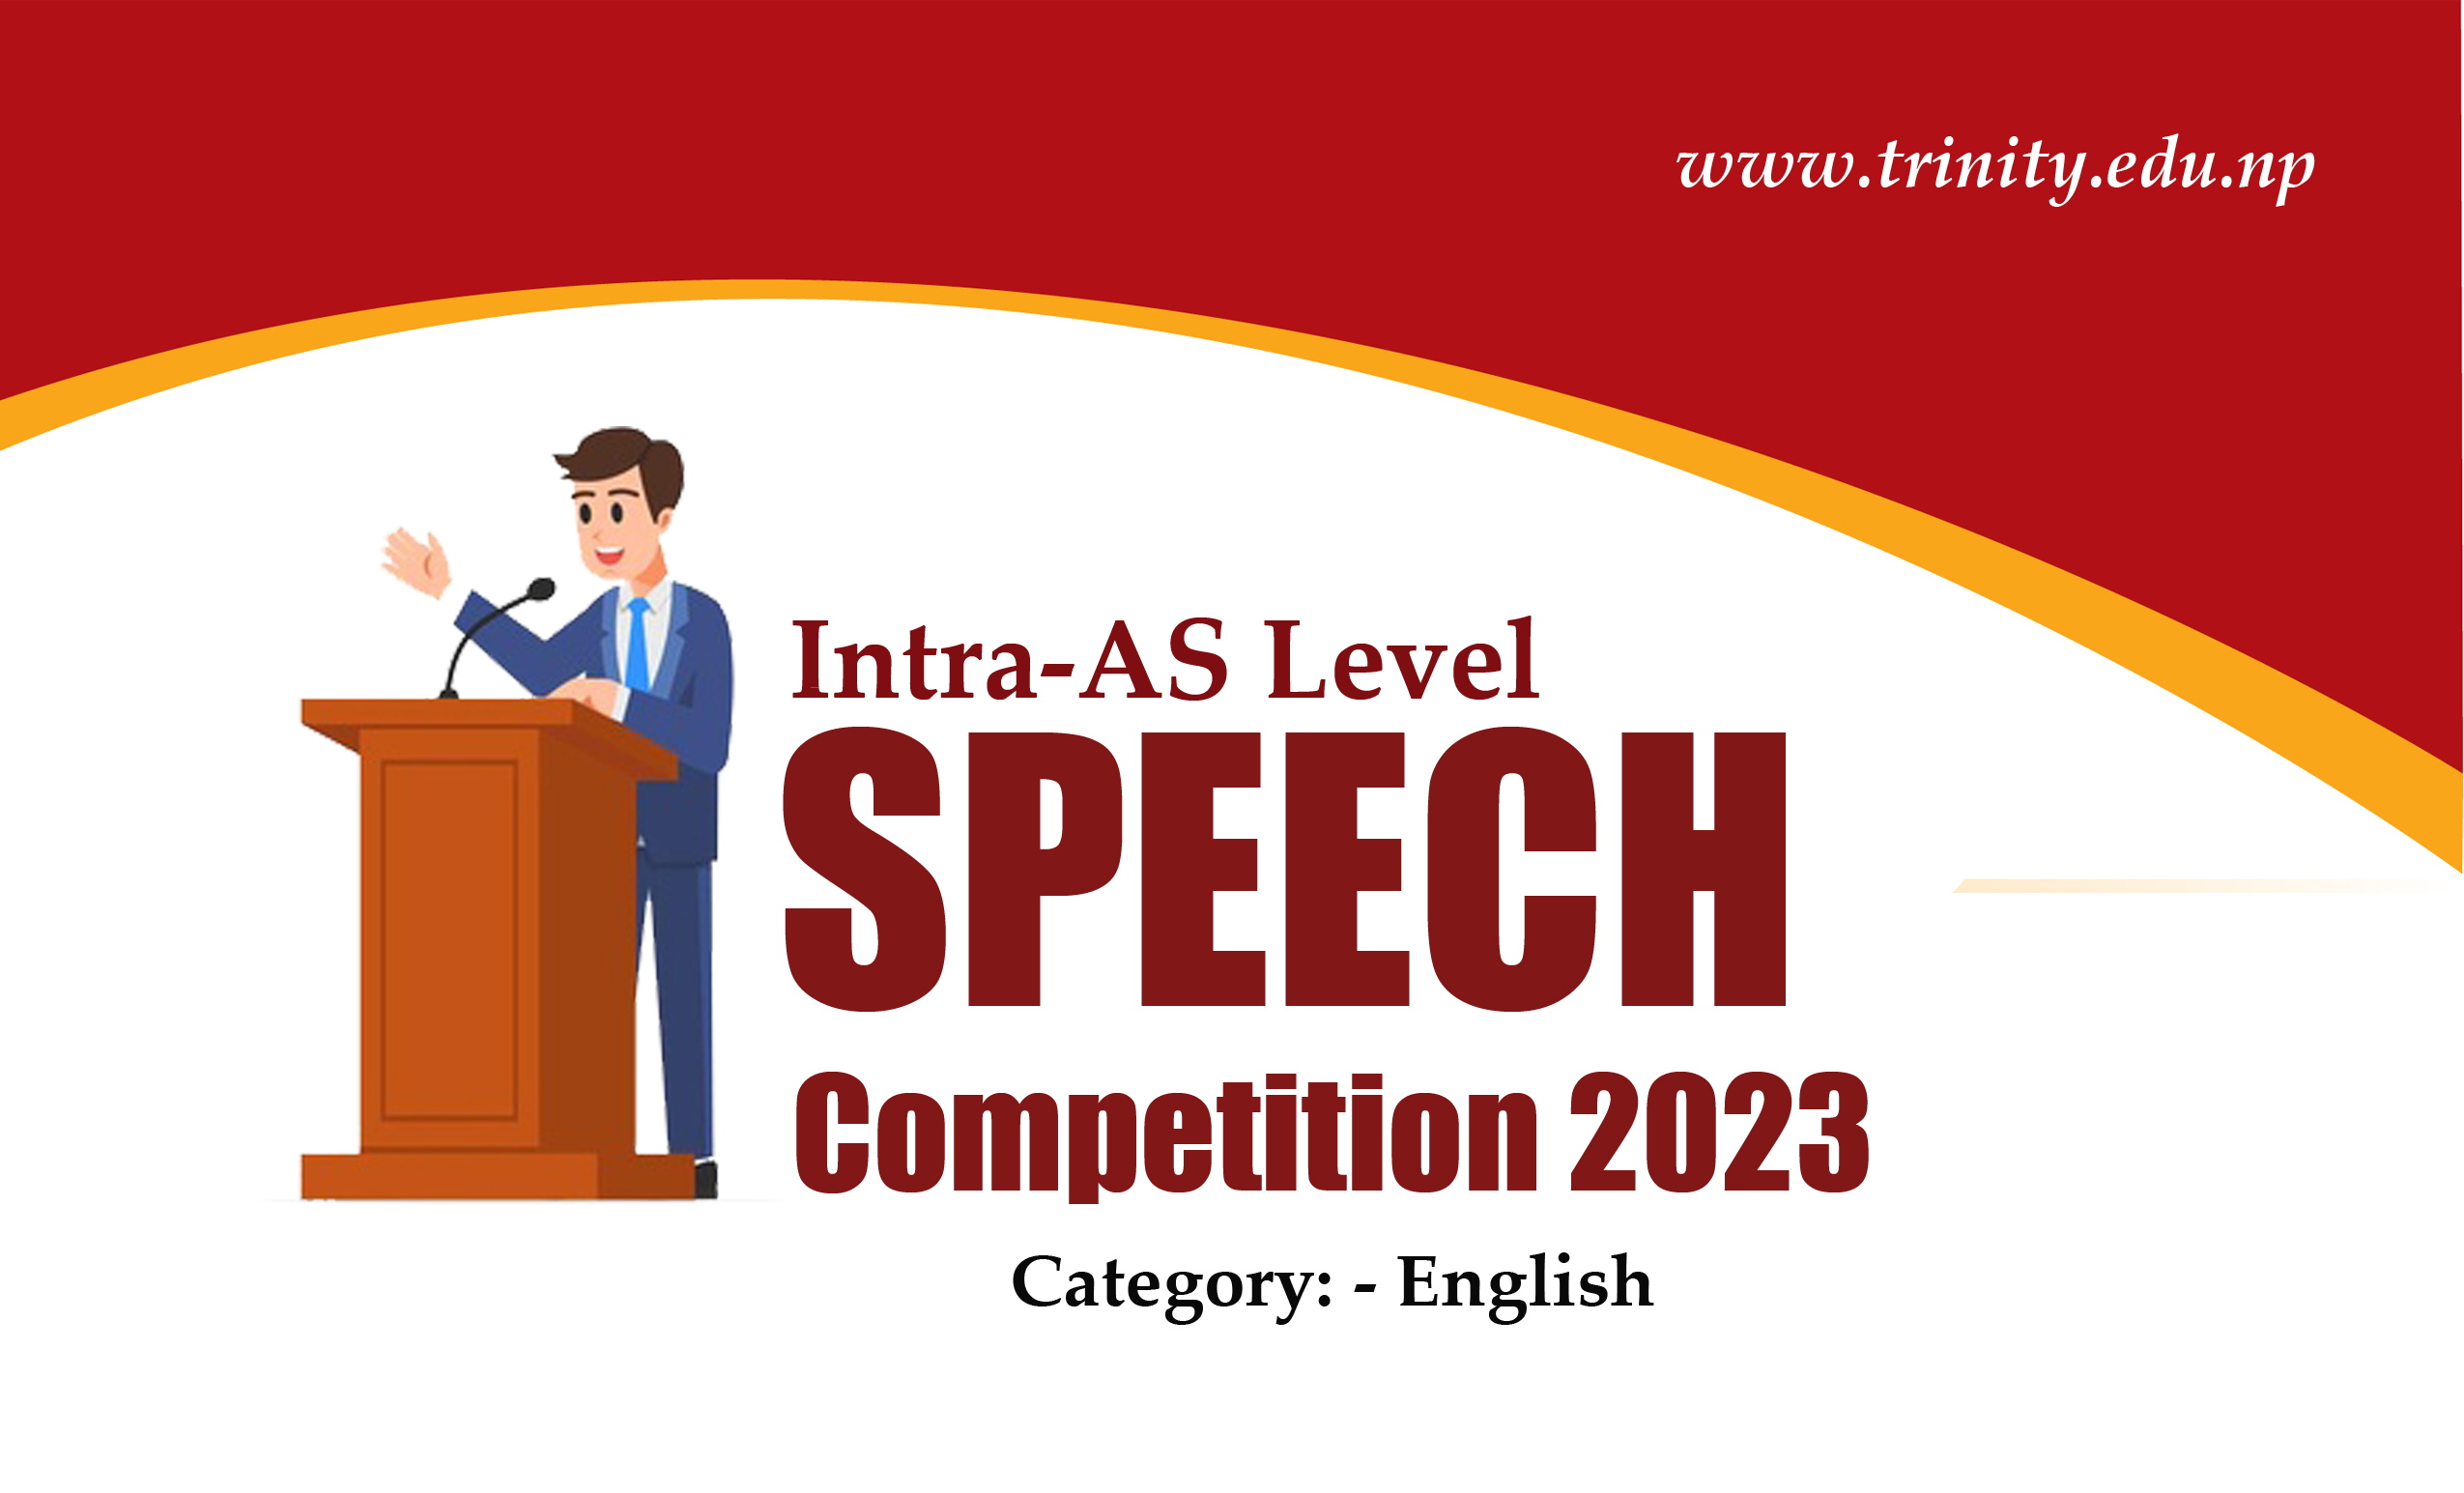 IntraAS Level Speech Competition 2023